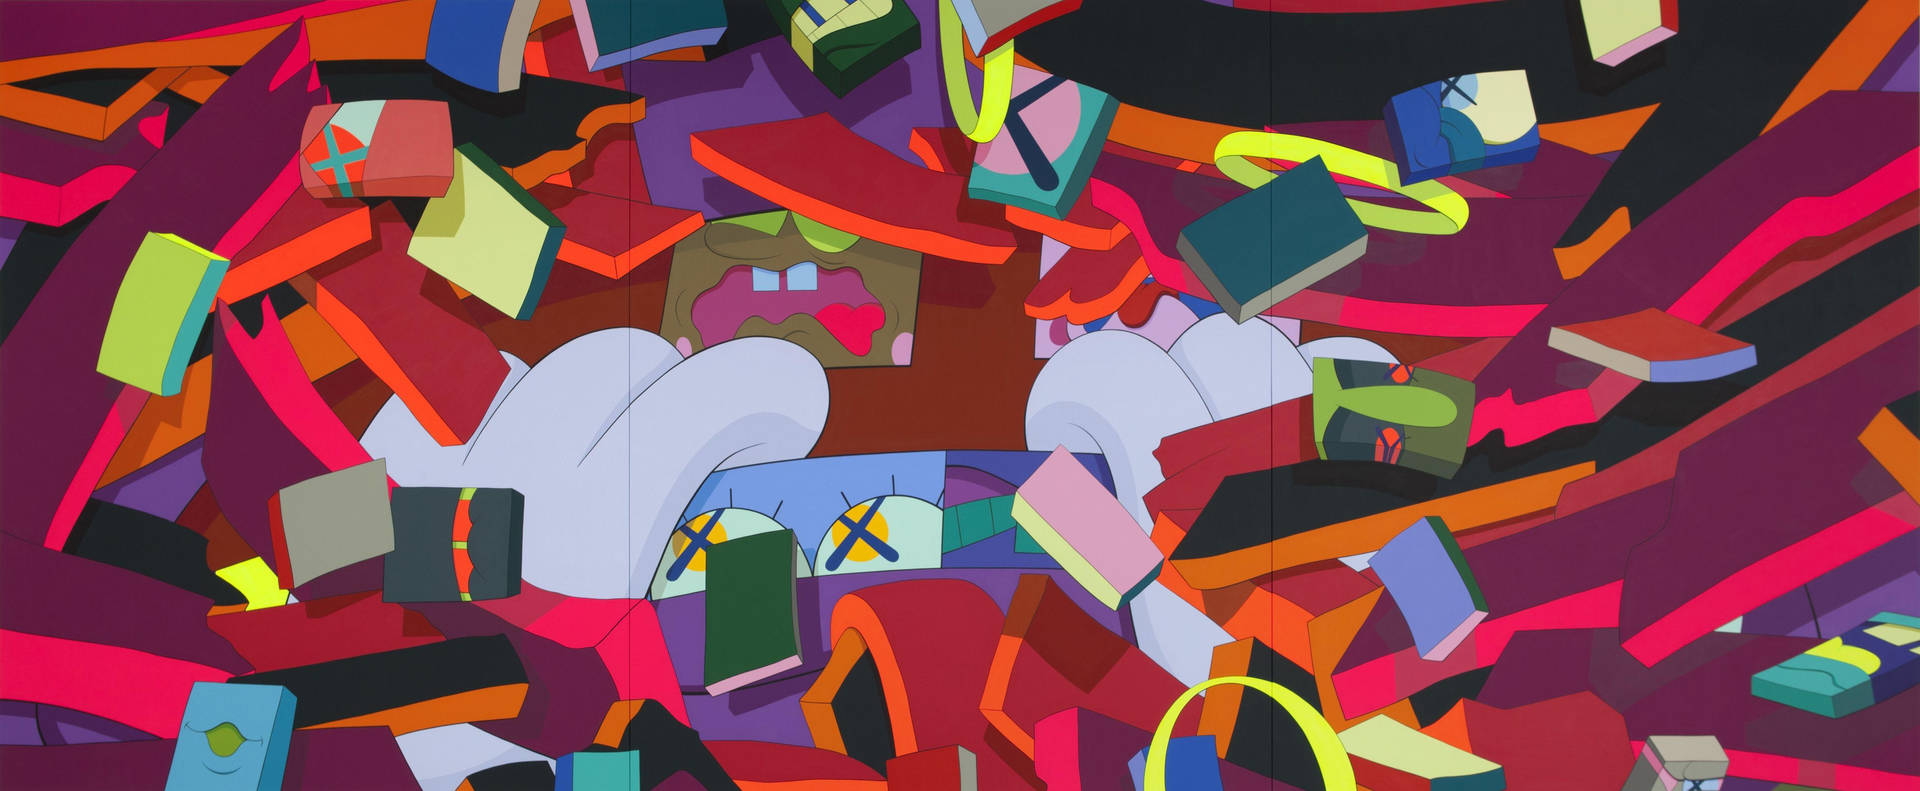 Kaws 5052X2082 Wallpaper and Background Image